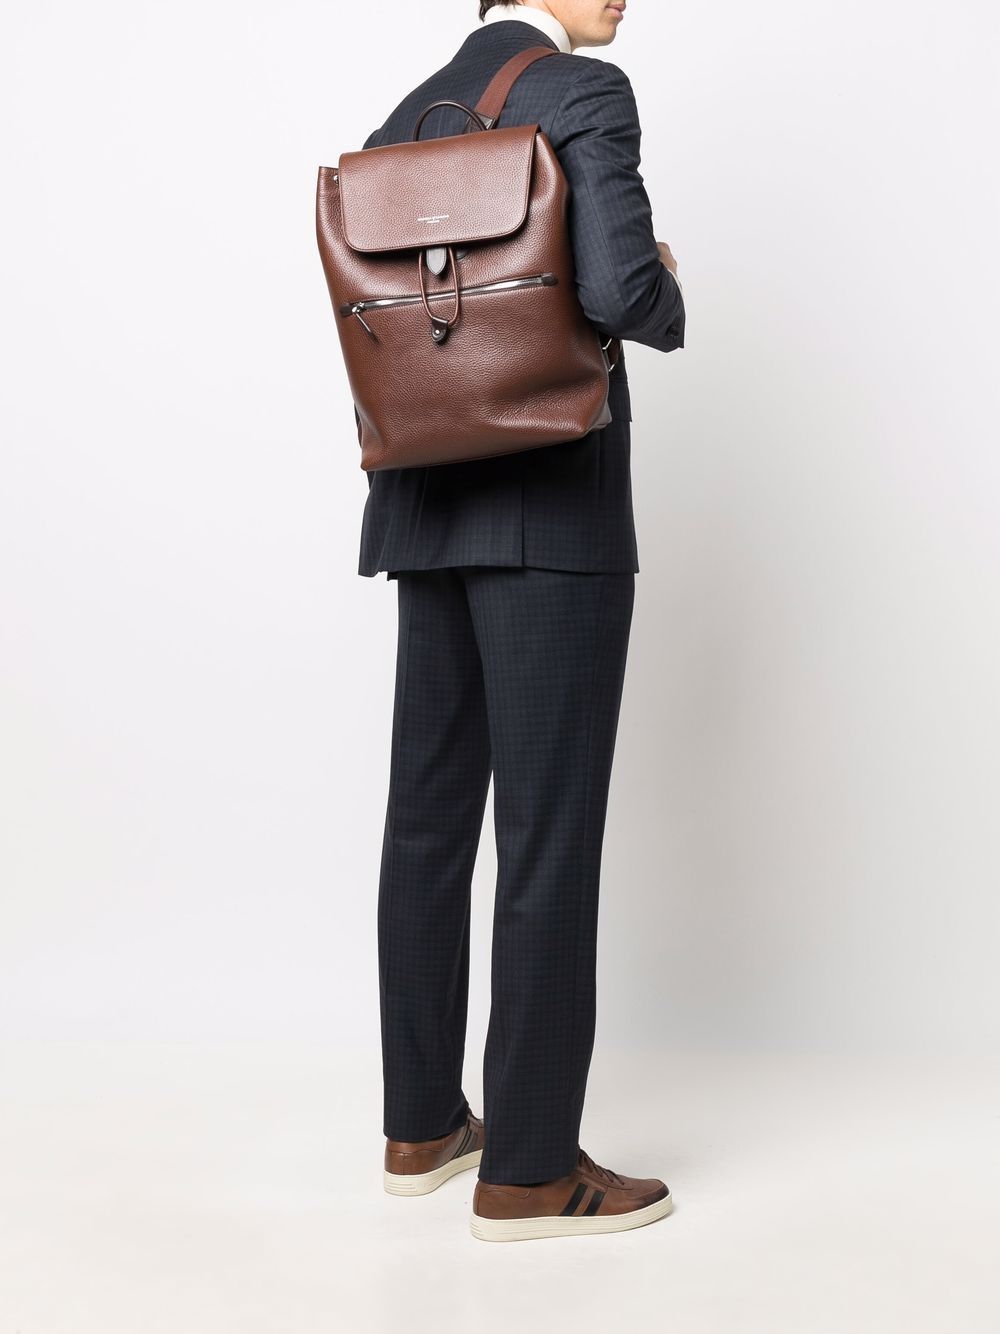 Aspinal Of London Reporter grained-effect Backpack - Farfetch